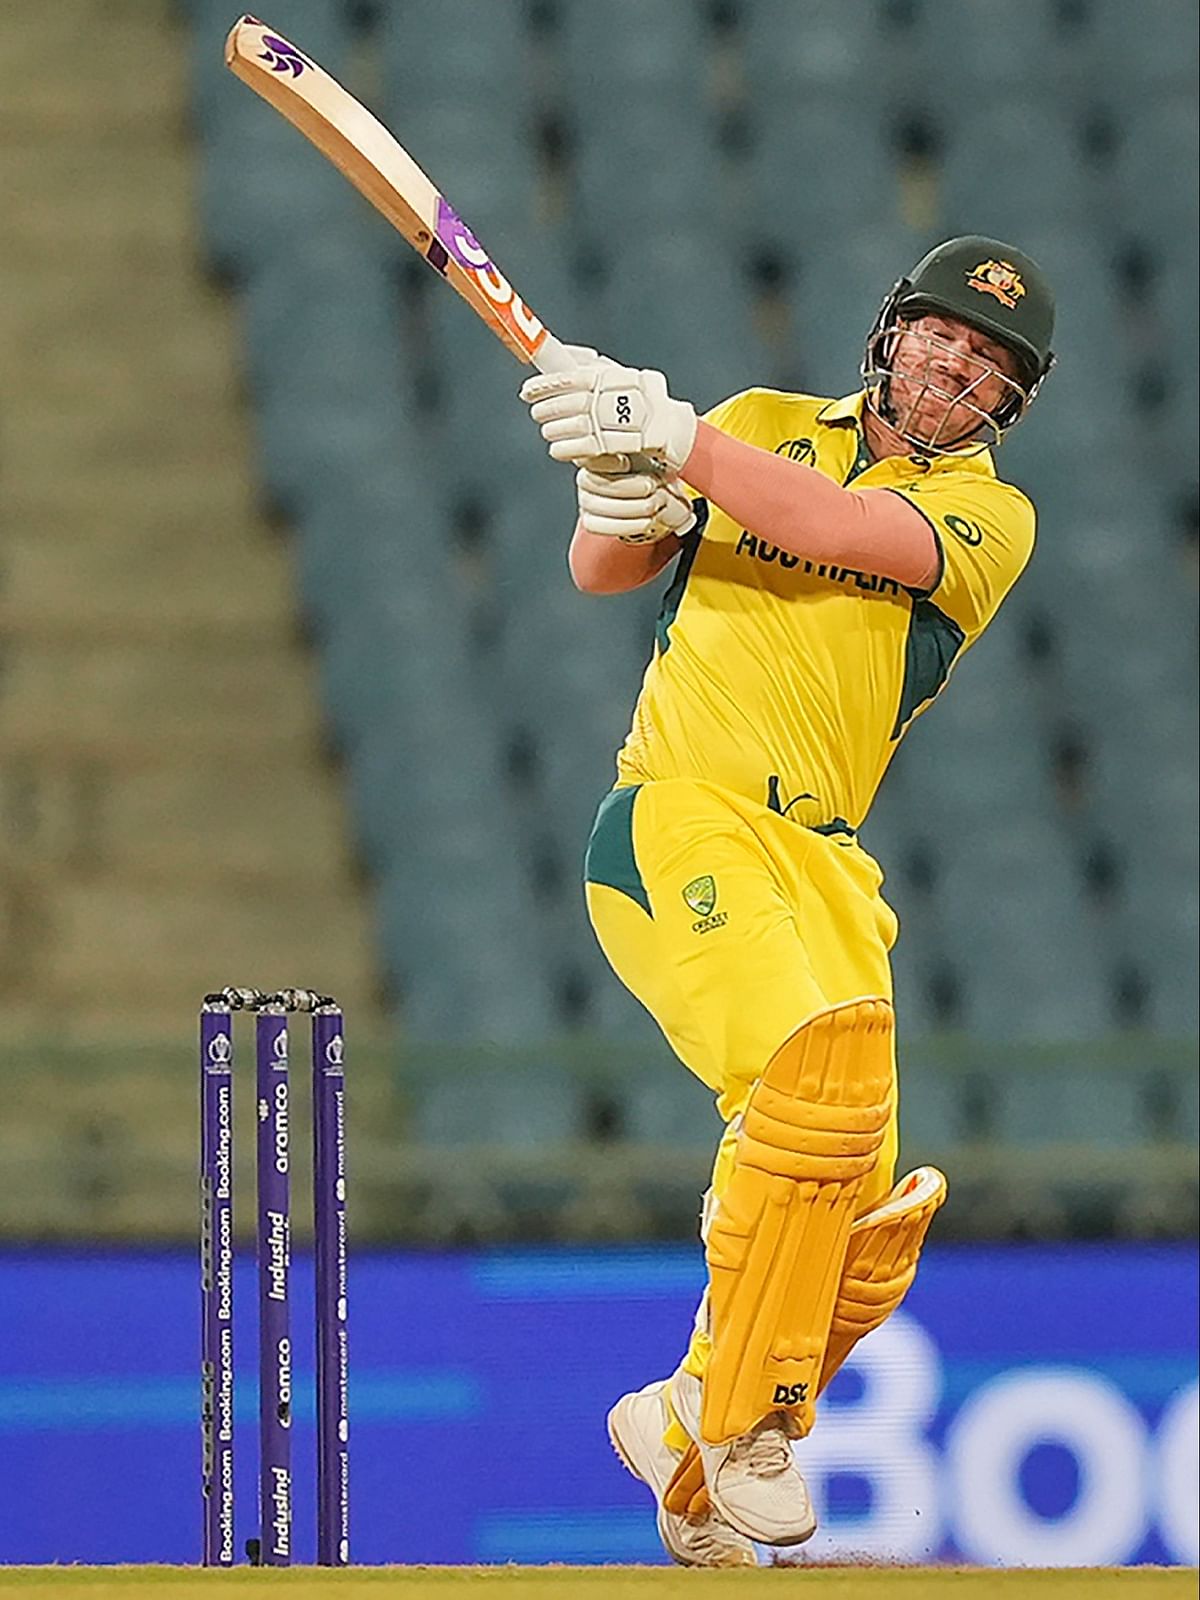 The star batsman for Australia, David Warner will play a crucial role in Australia’s game. His experience and talent will come handy in today's match.